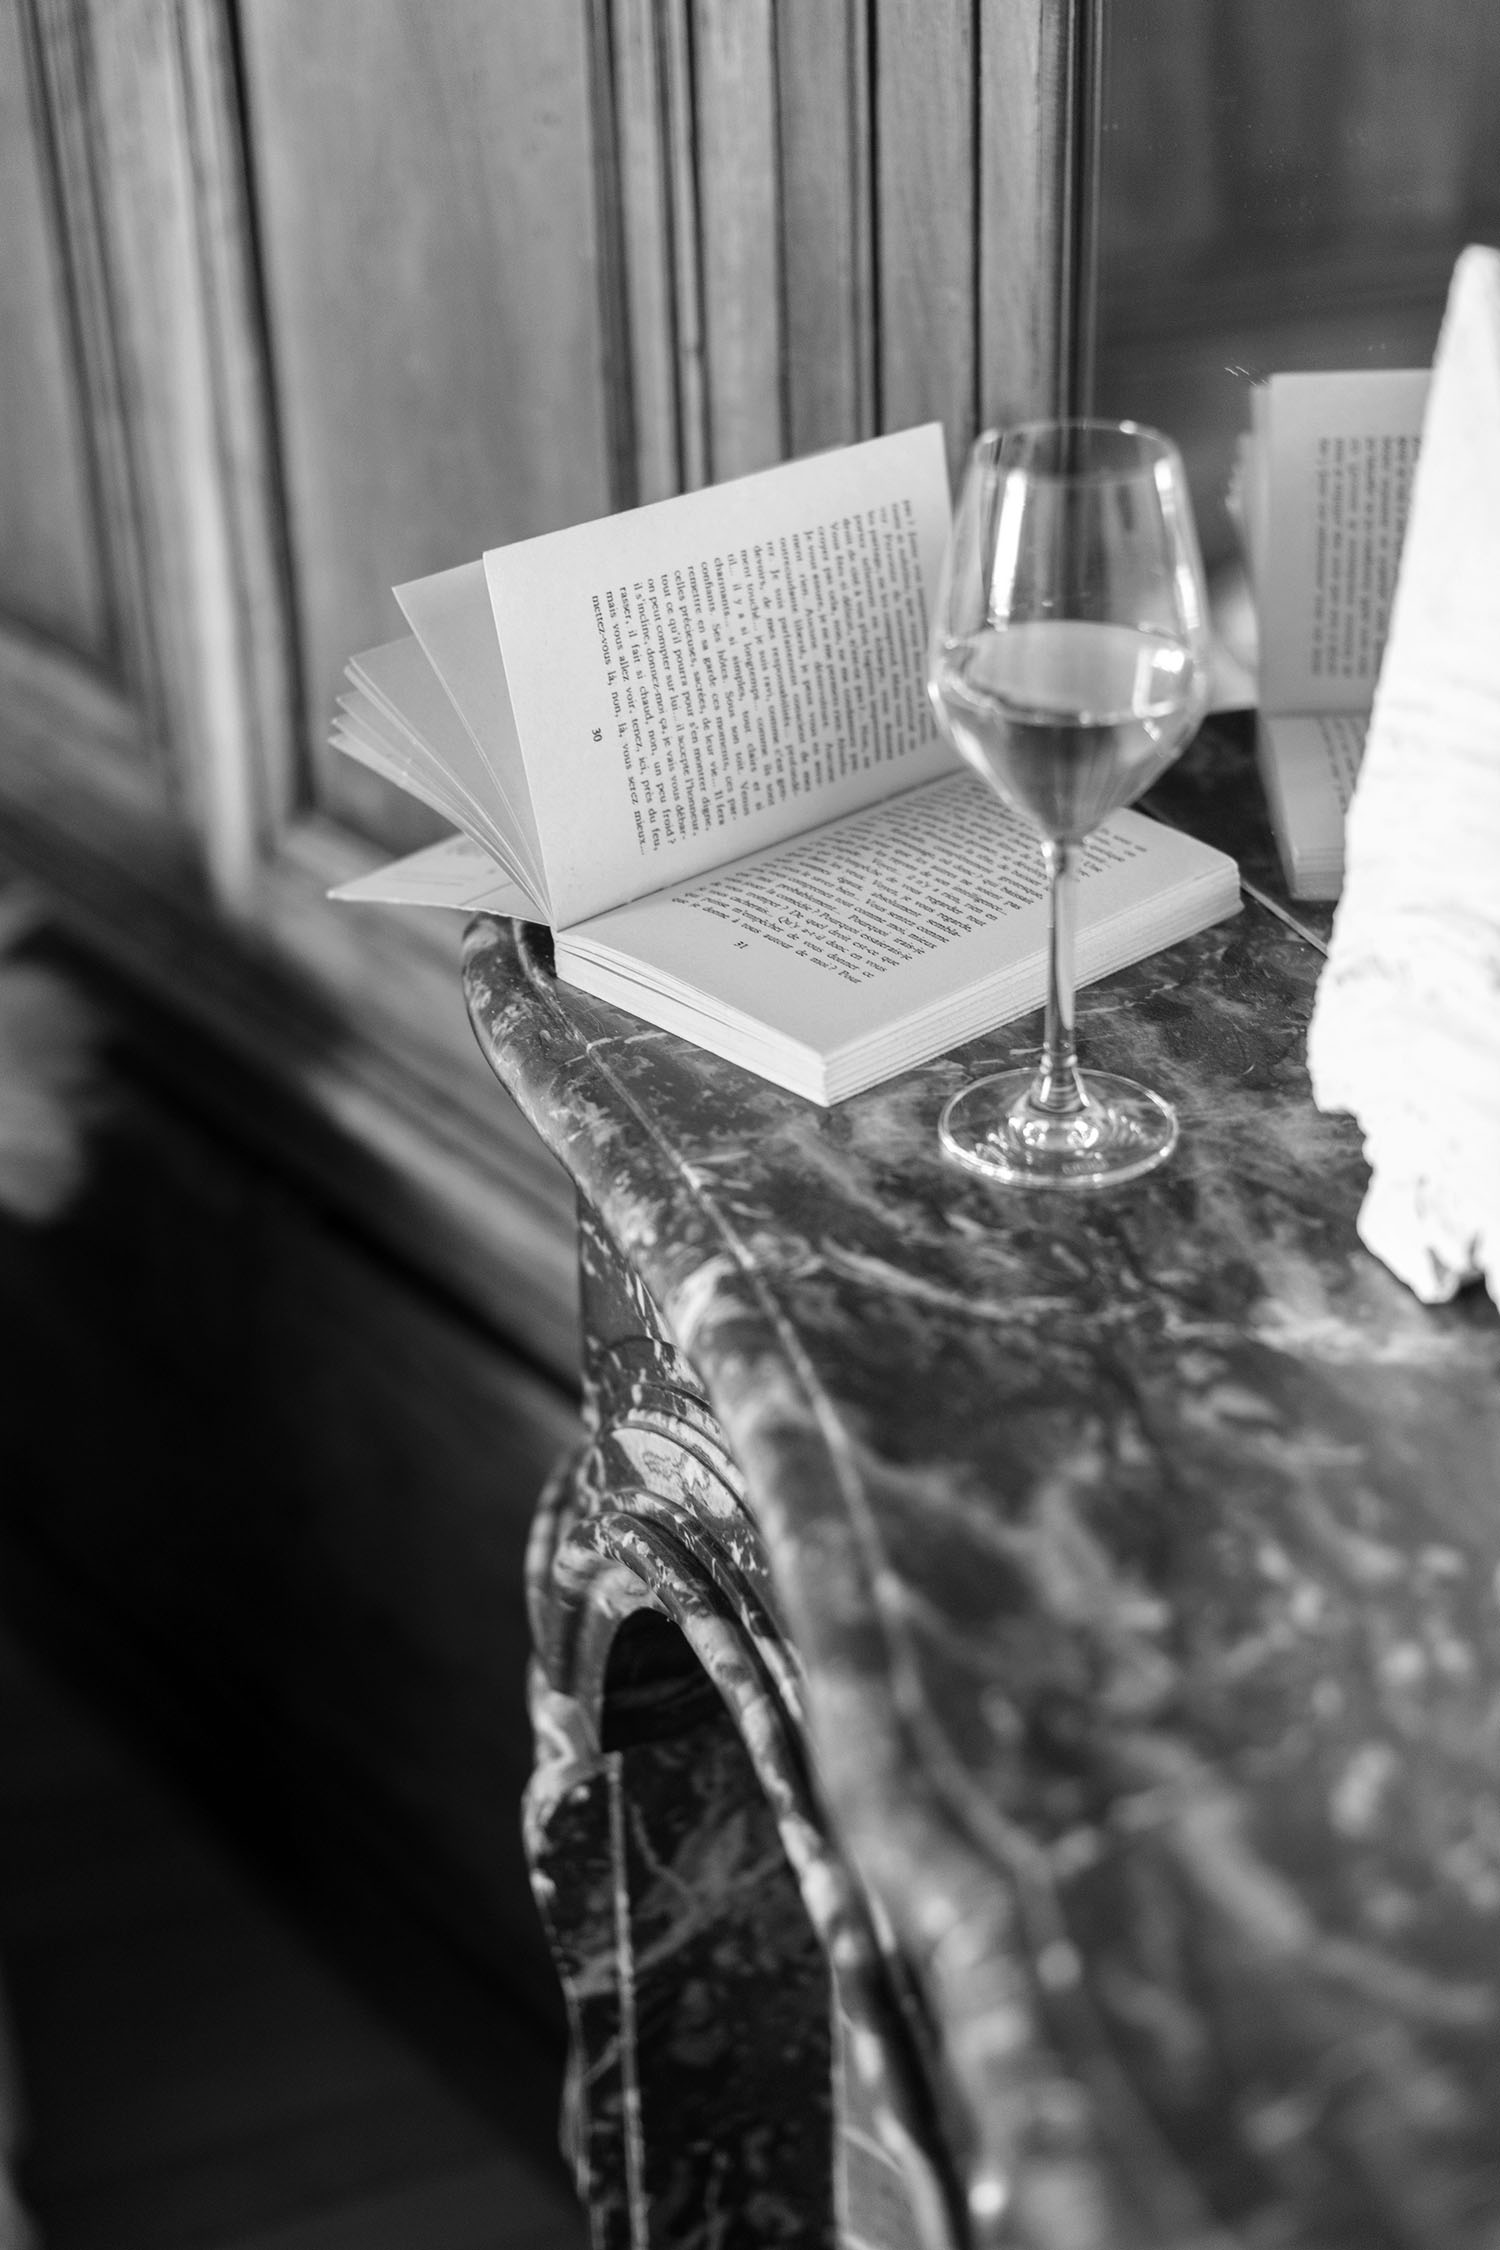 Coco & Voltaire - Editions Gallimard novel on a marble fireplace mantle next to a glass of wine